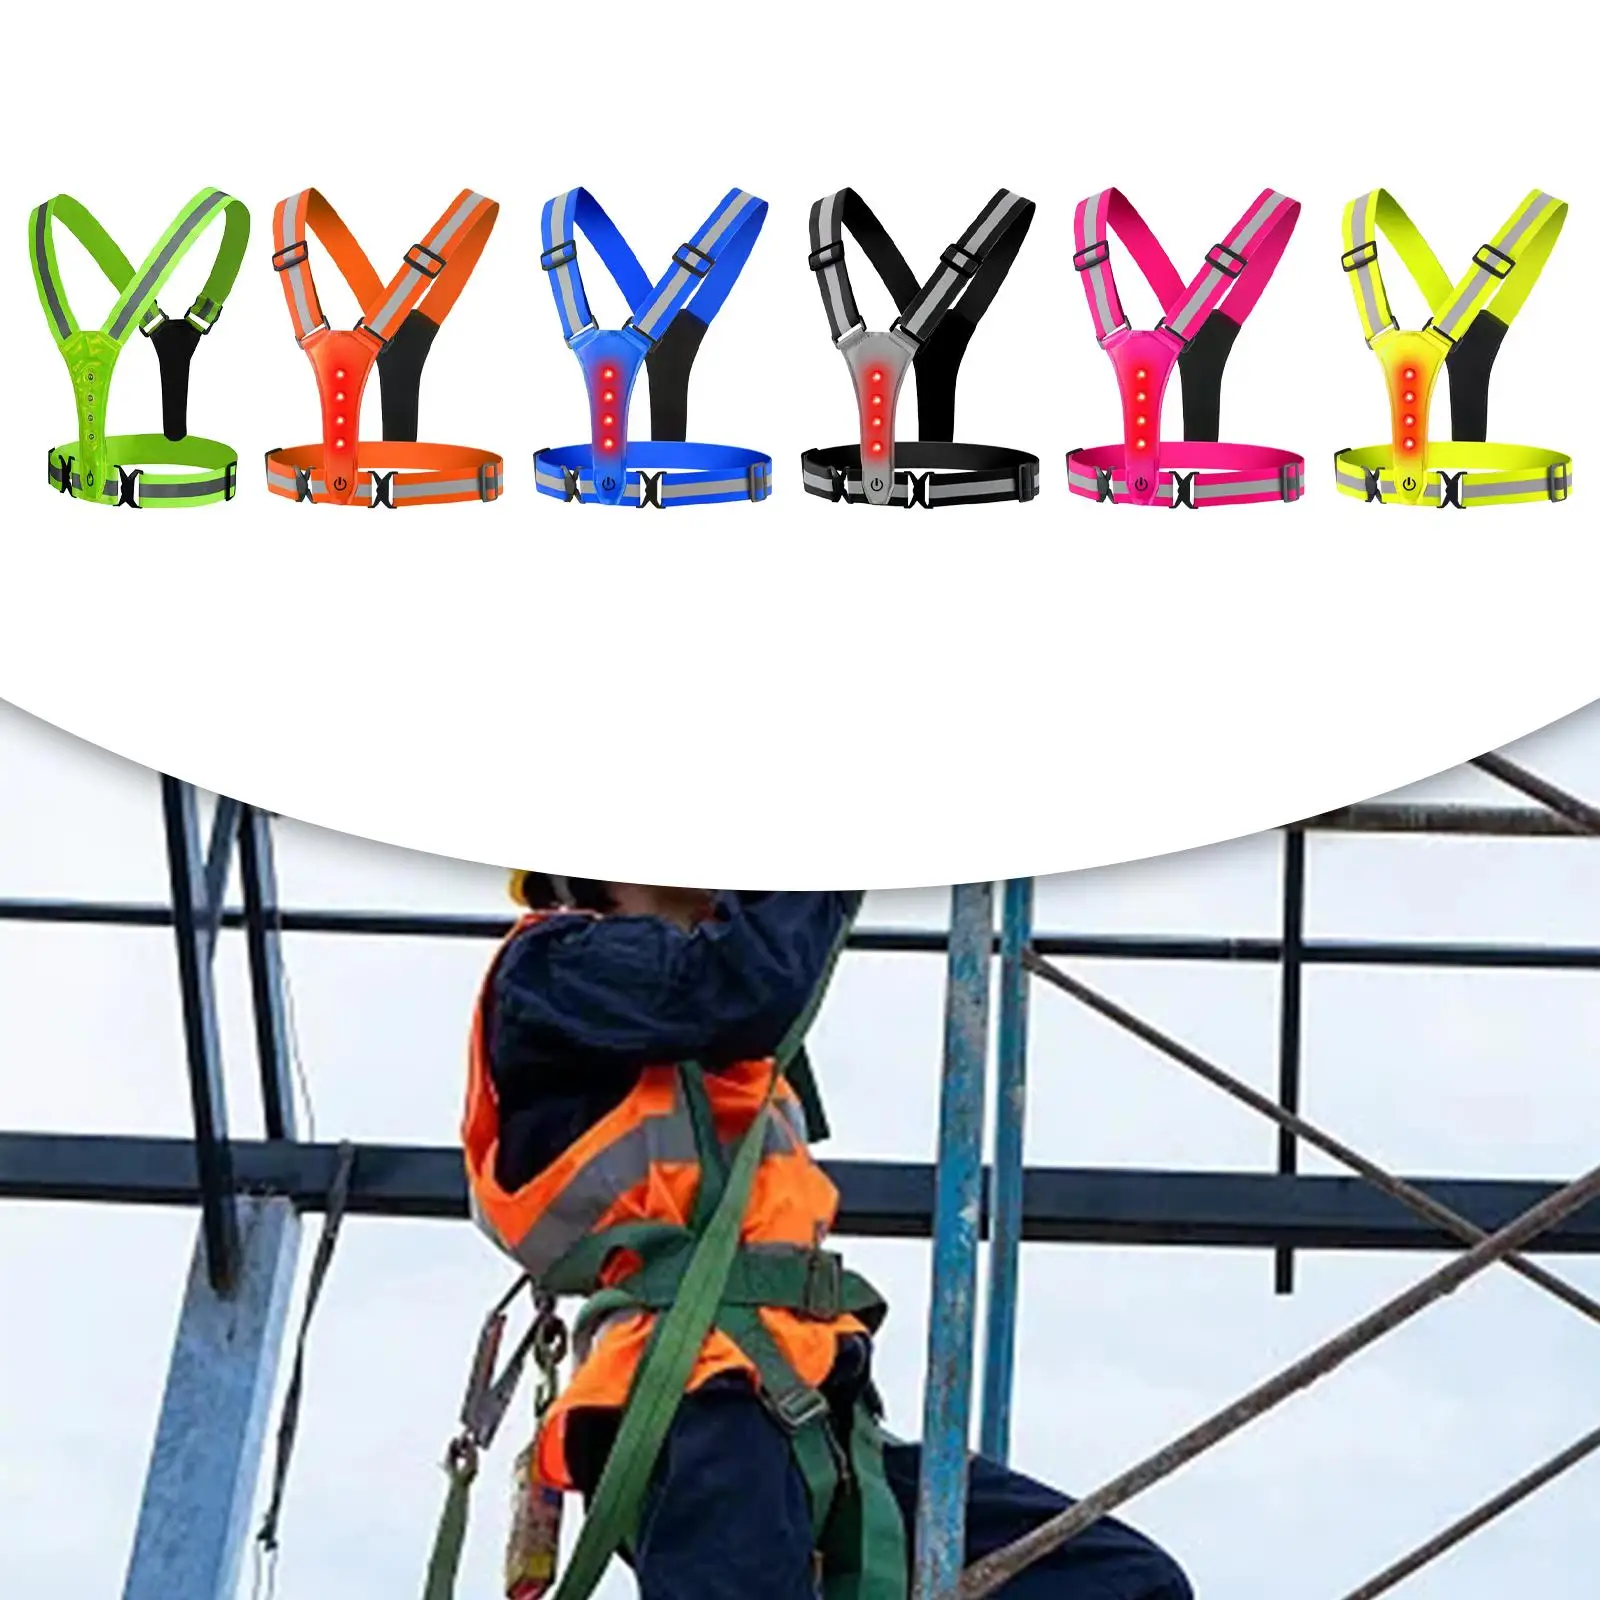 

LED Reflective Vest Glowing Reflector Straps Warning Lights for Kids Children Night Running Cycling Hiking Gear Reflective